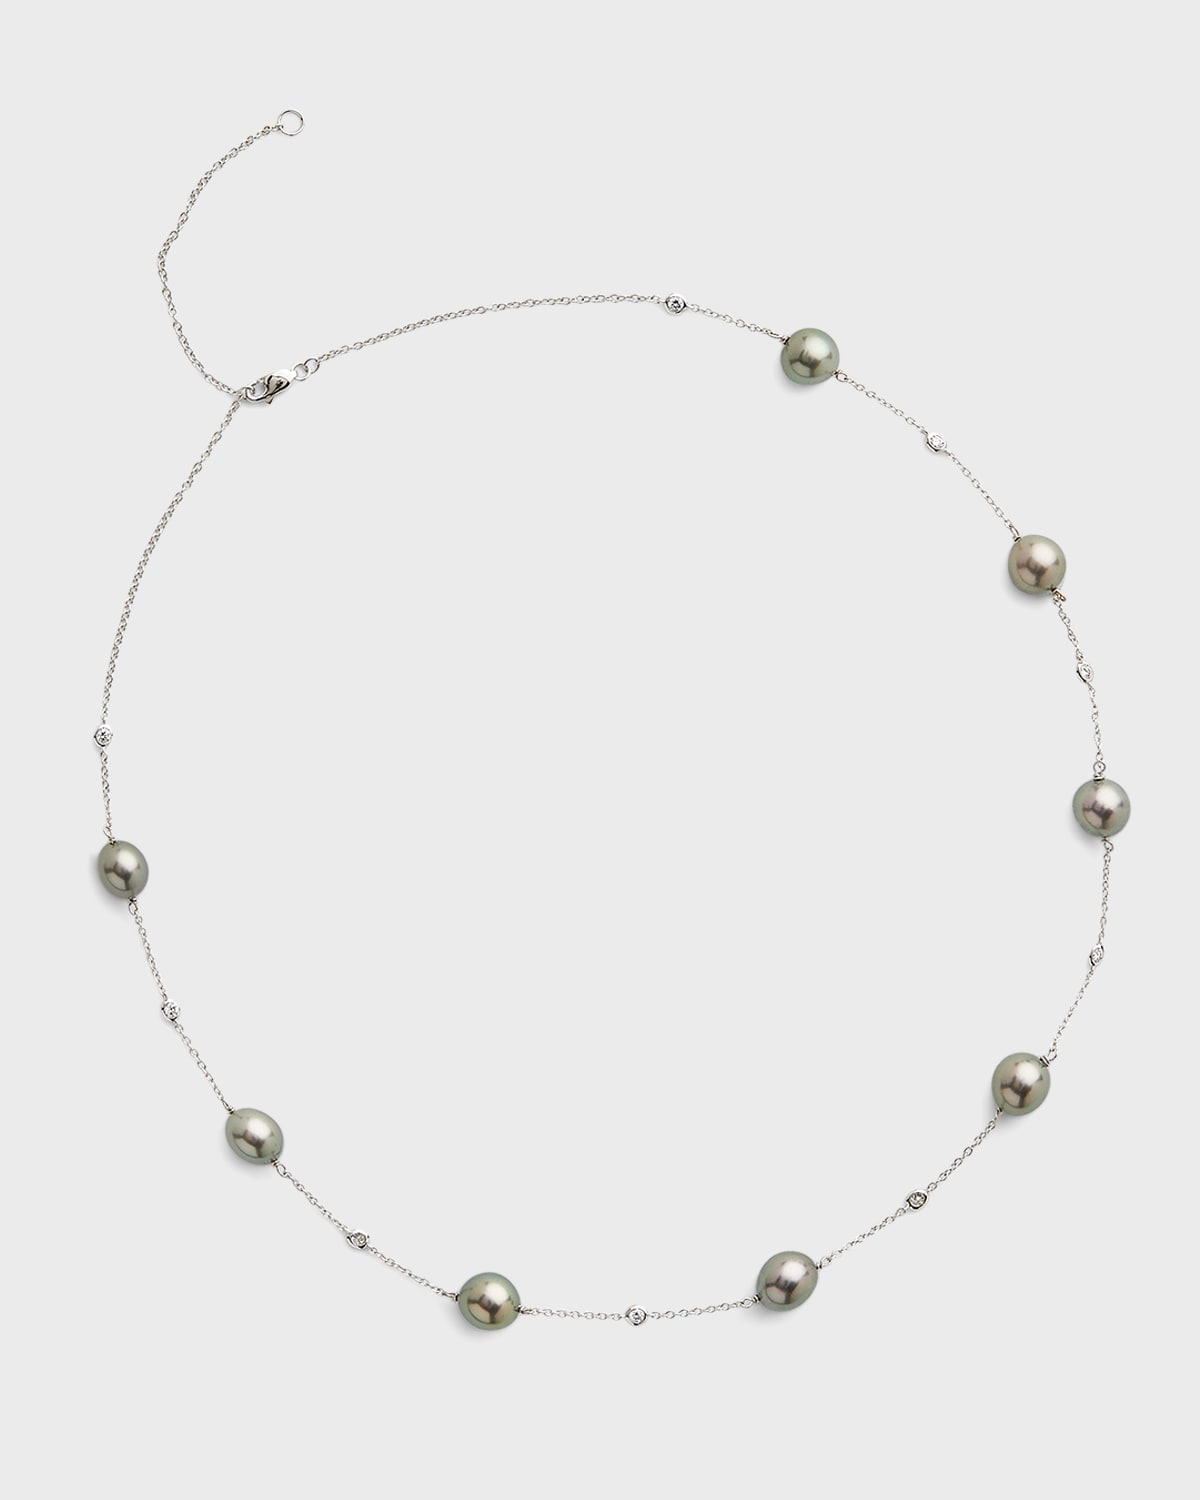 18K White Gold 9mm Gray Tahitian 7-Pearl and Diamond Necklace, 17.5"L